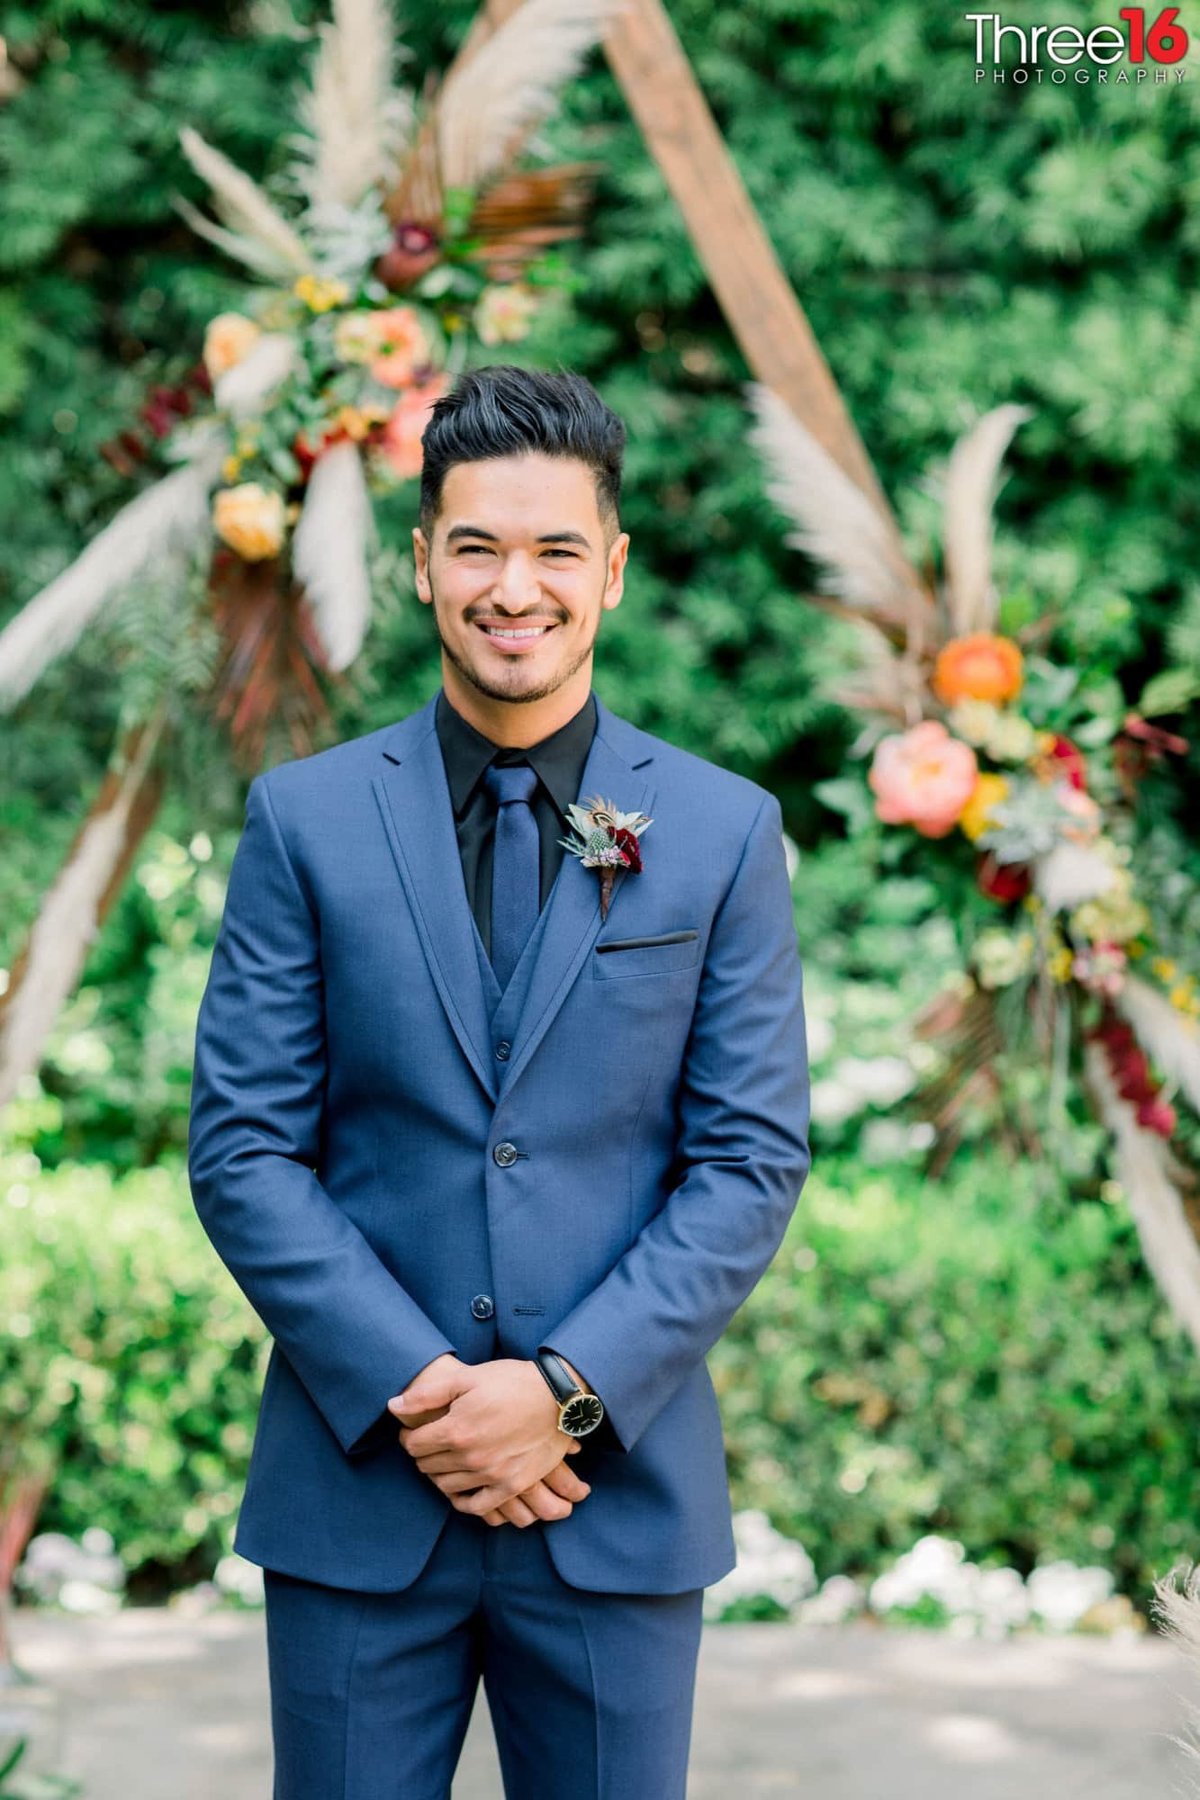 Groom smiles as he poses in his blue suit